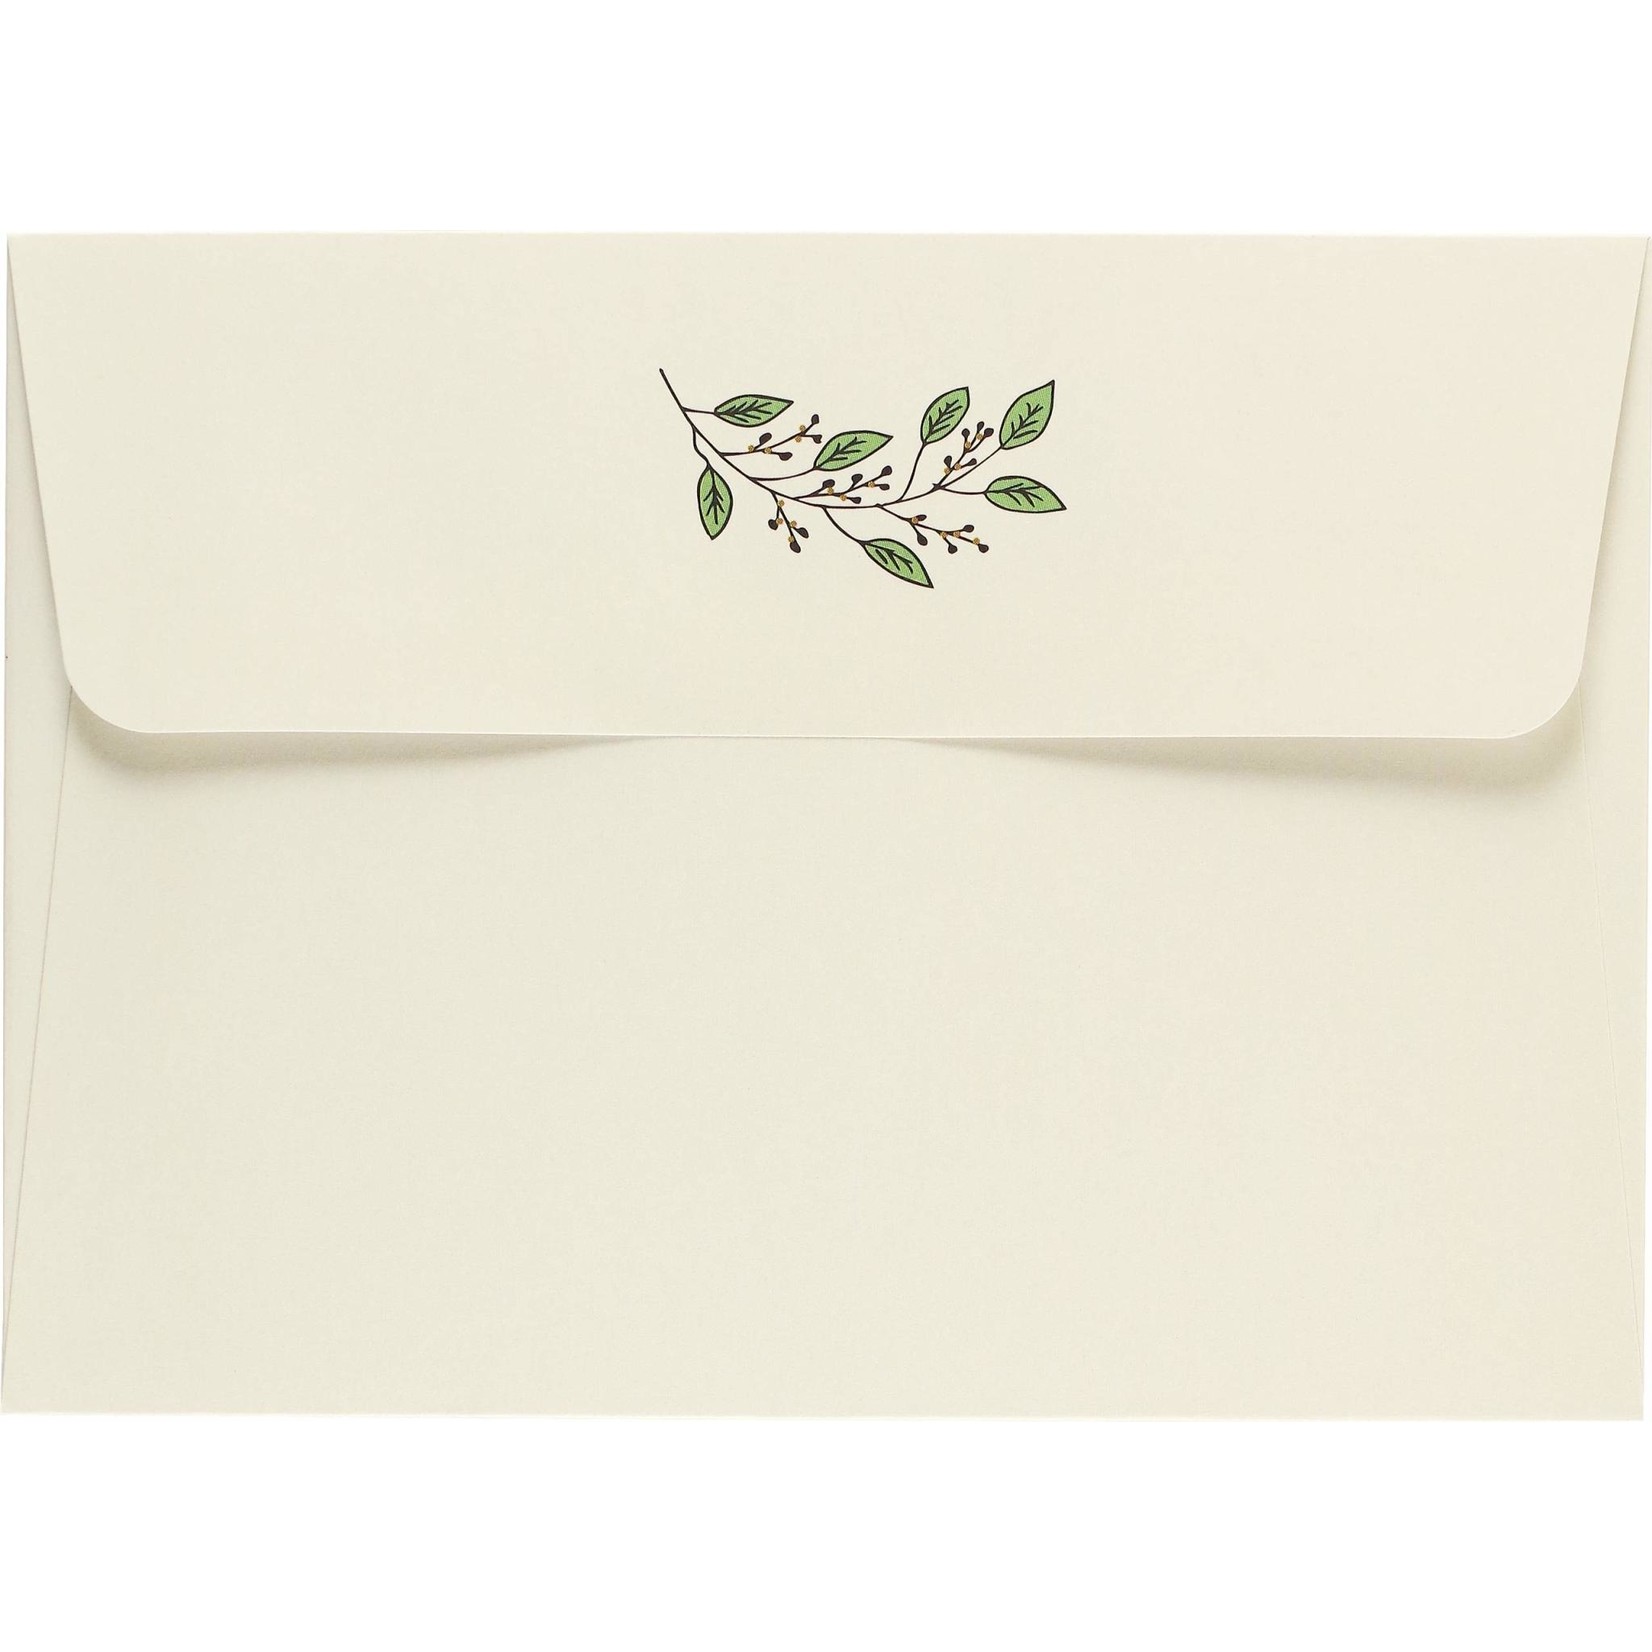 Peter Pauper Press Boxed Thank You Cards: Native Botanicals